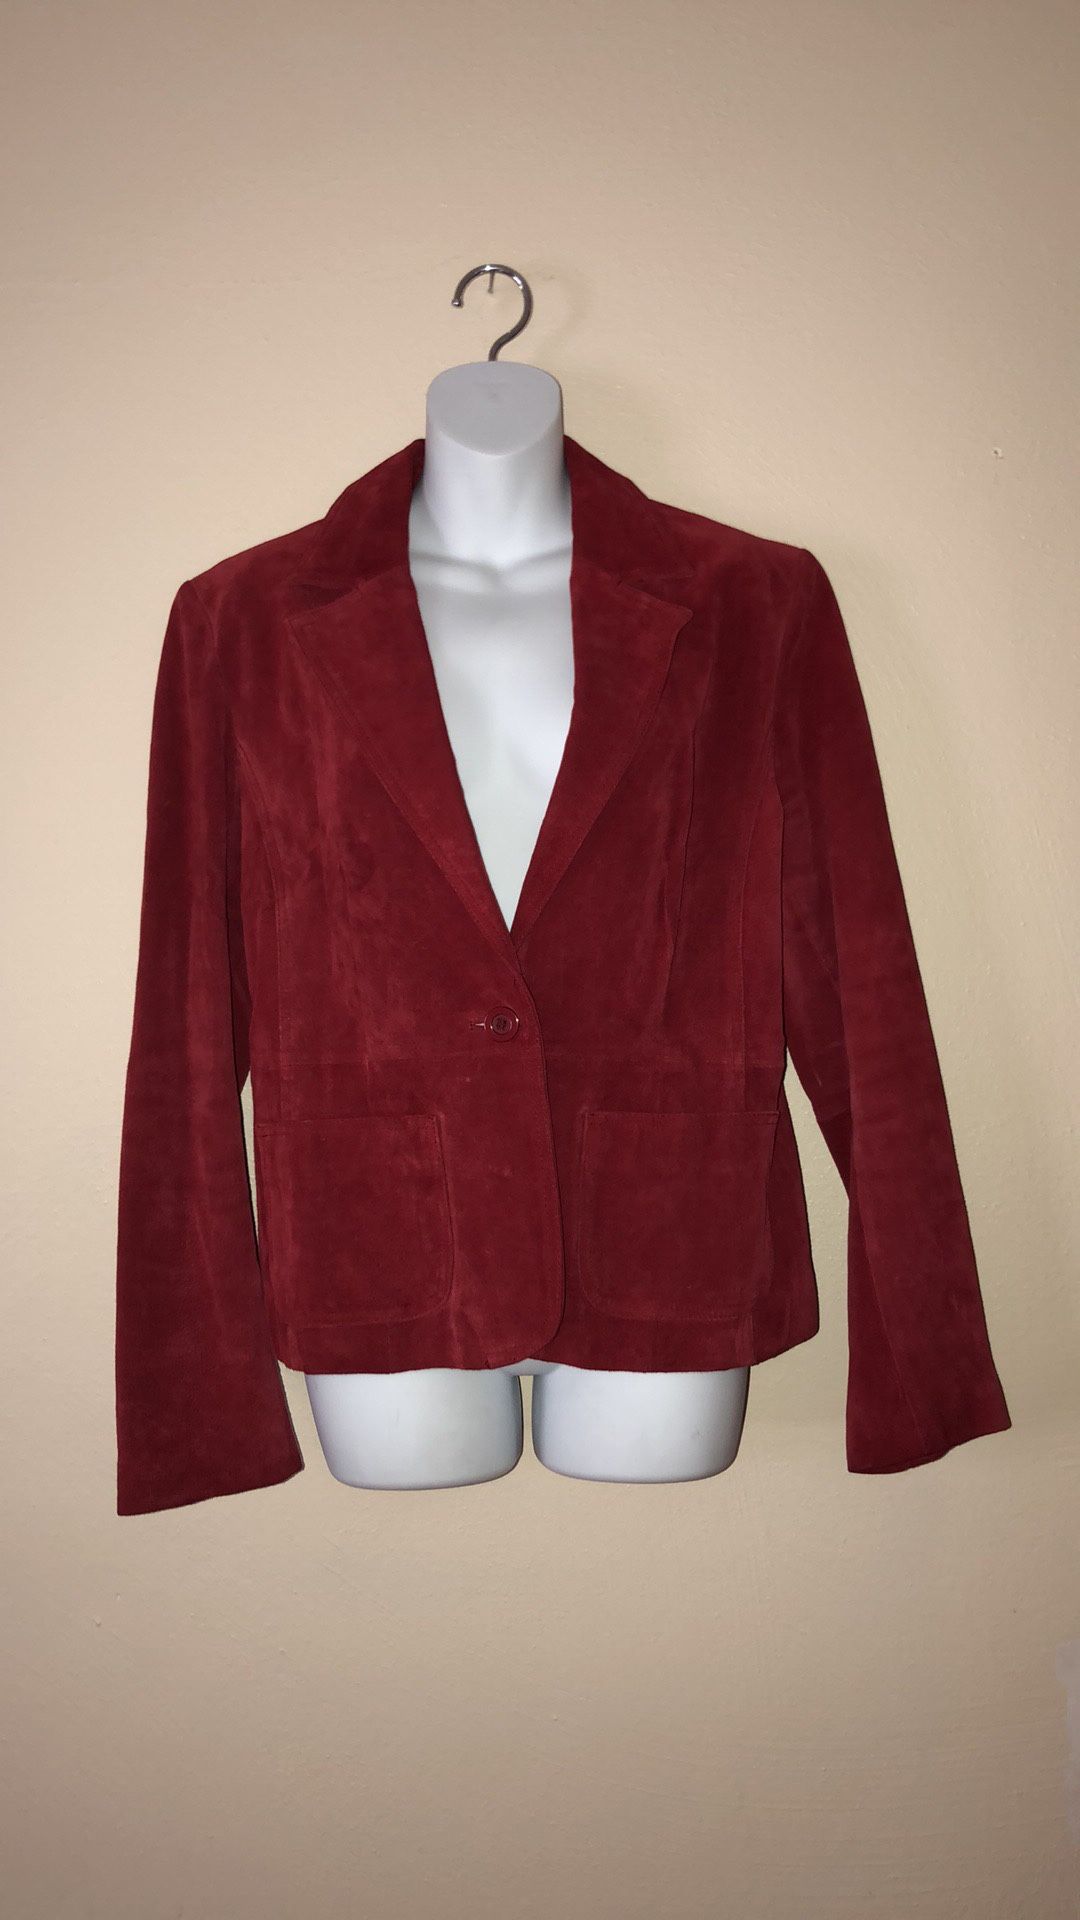 Size 14 red suede jacket with pockets in excellent condition